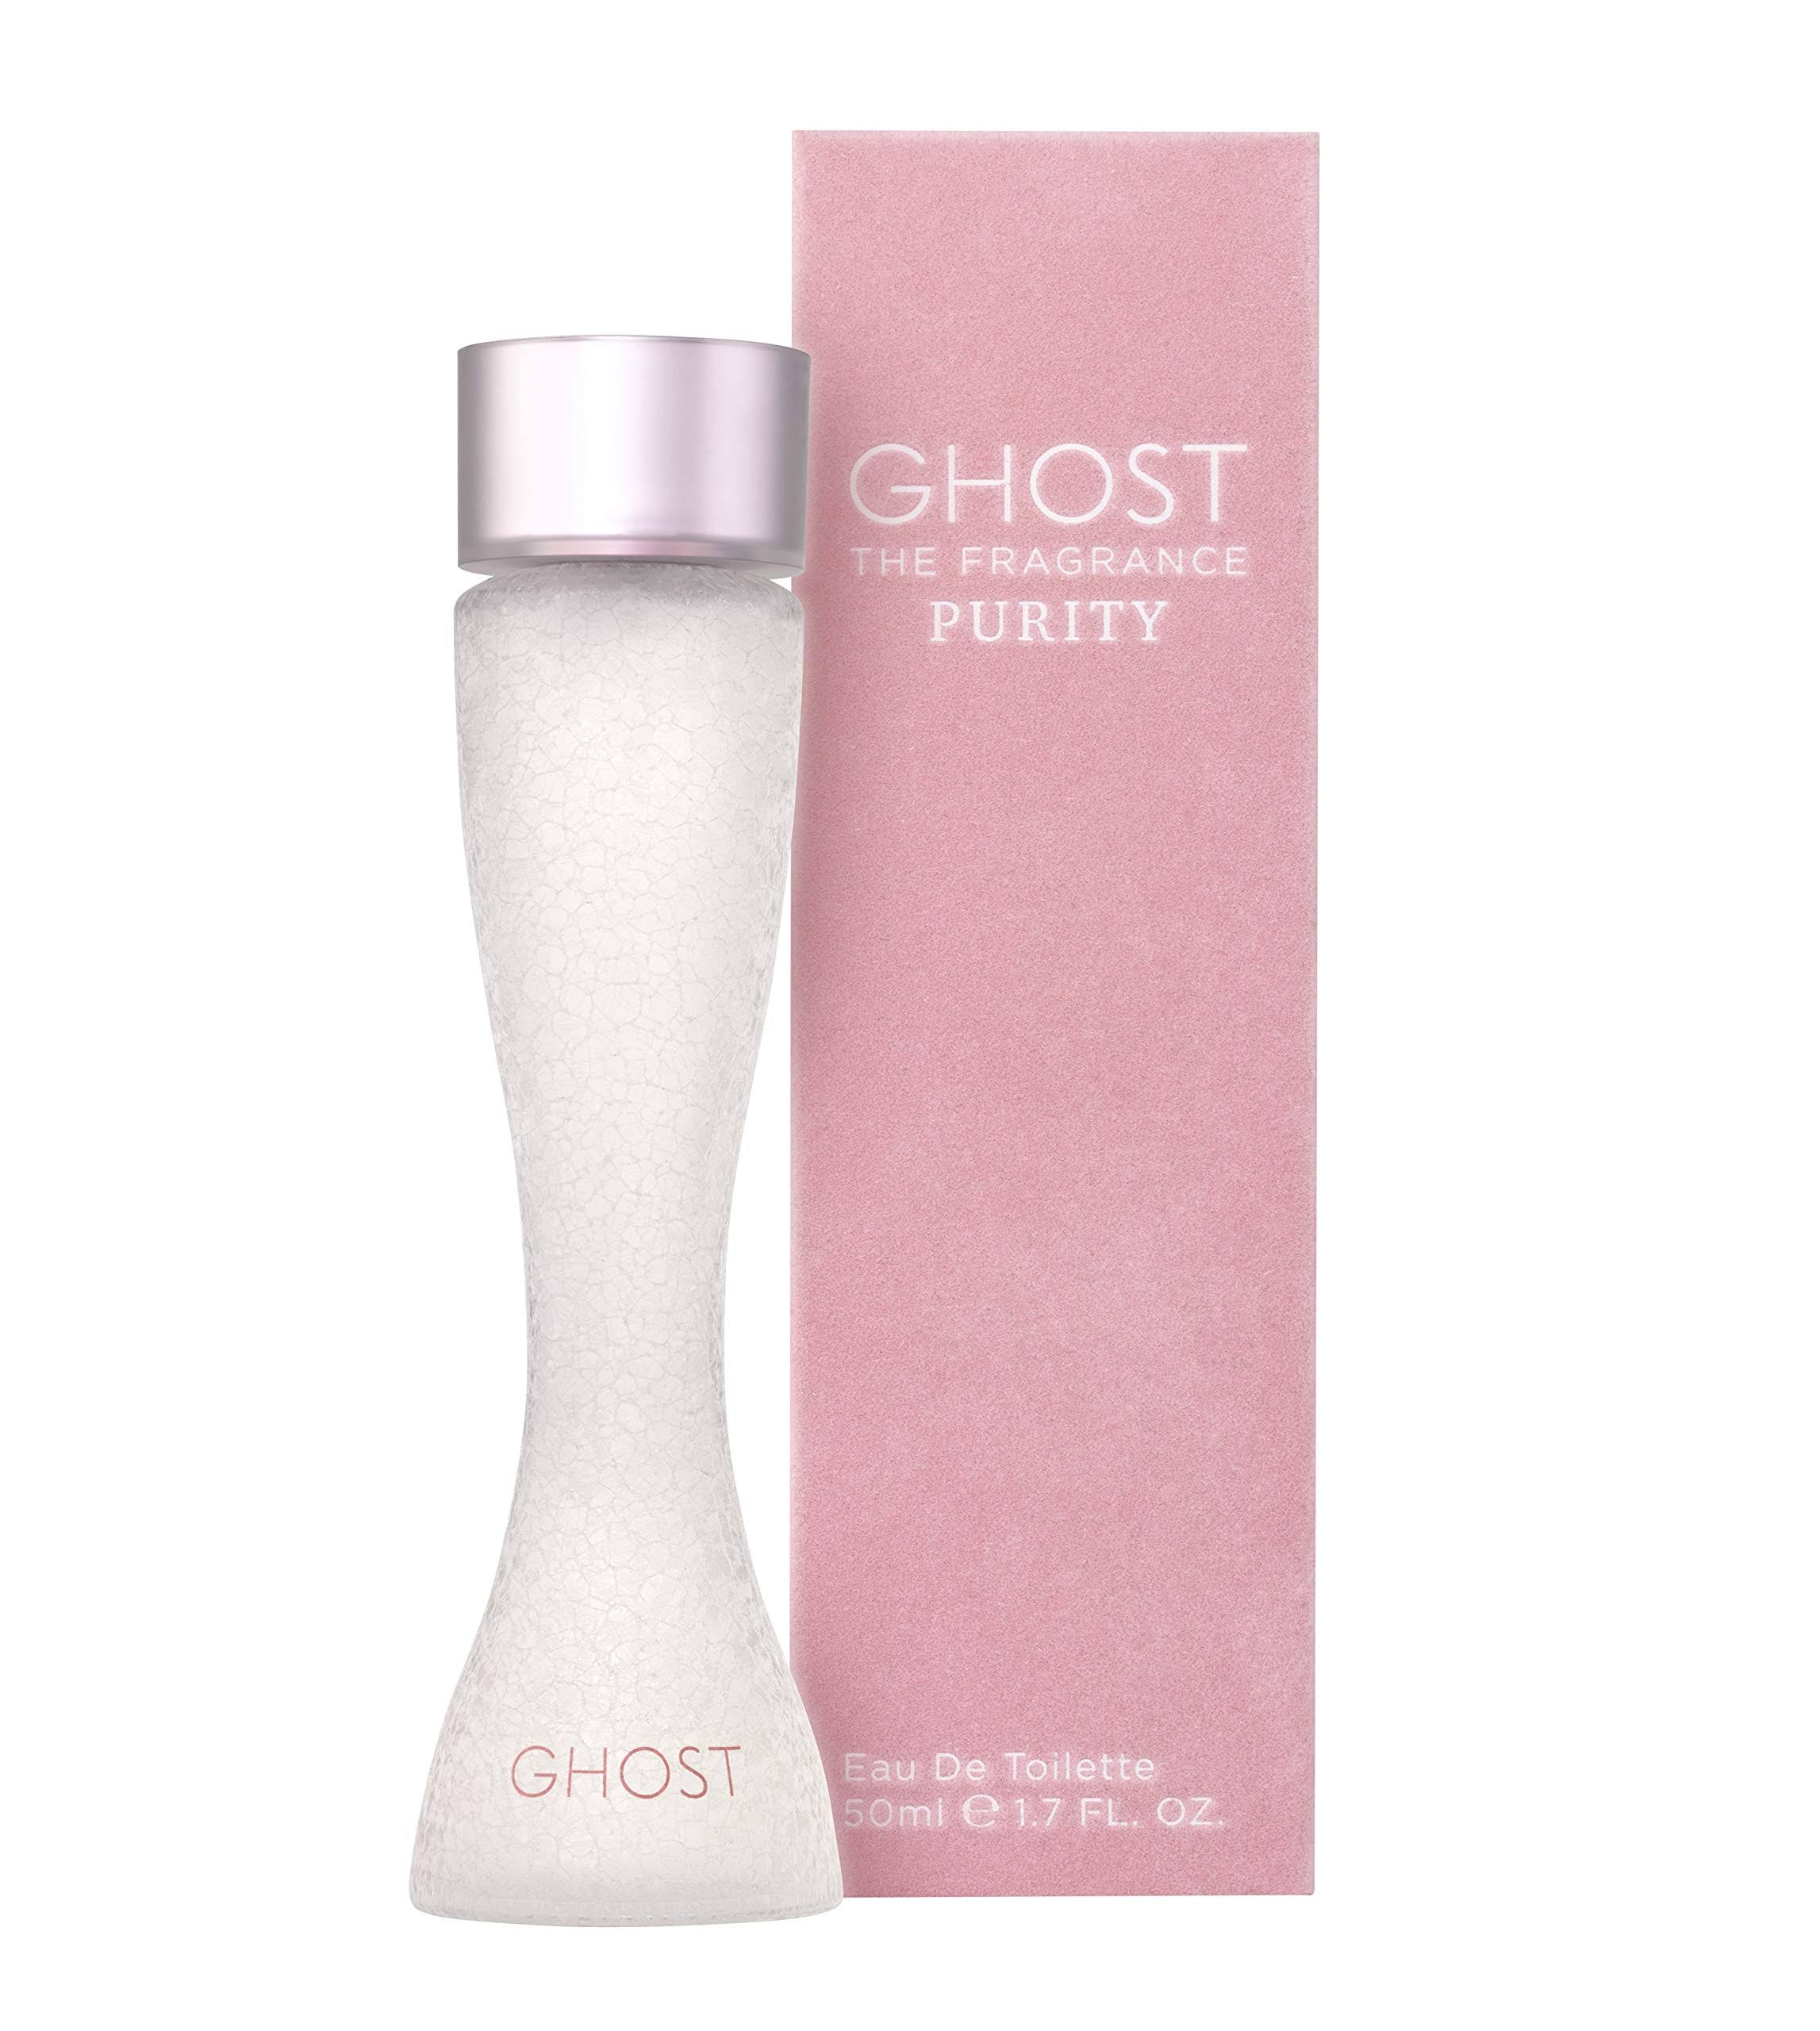 Ghost The Fragrance Purity - 1.7oz